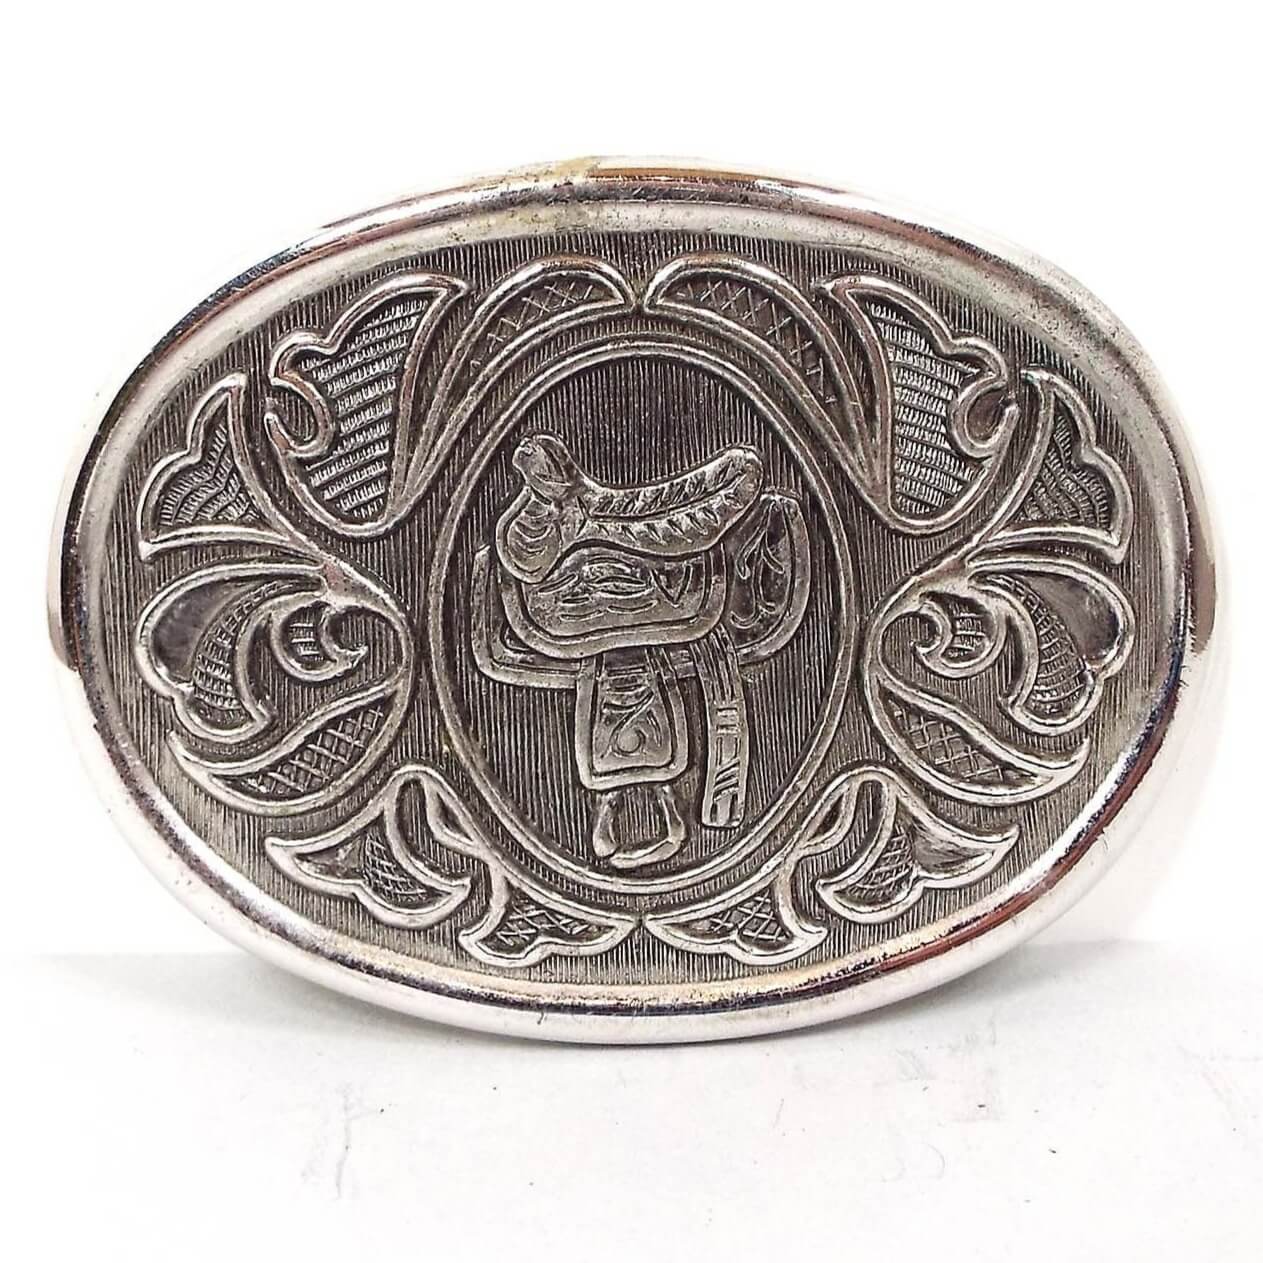 Front view of the retro vintage Avon belt buckle. It is silver tone in color with a light gray background. There is a horse saddle in the middle and a floral like pattern around the edge.